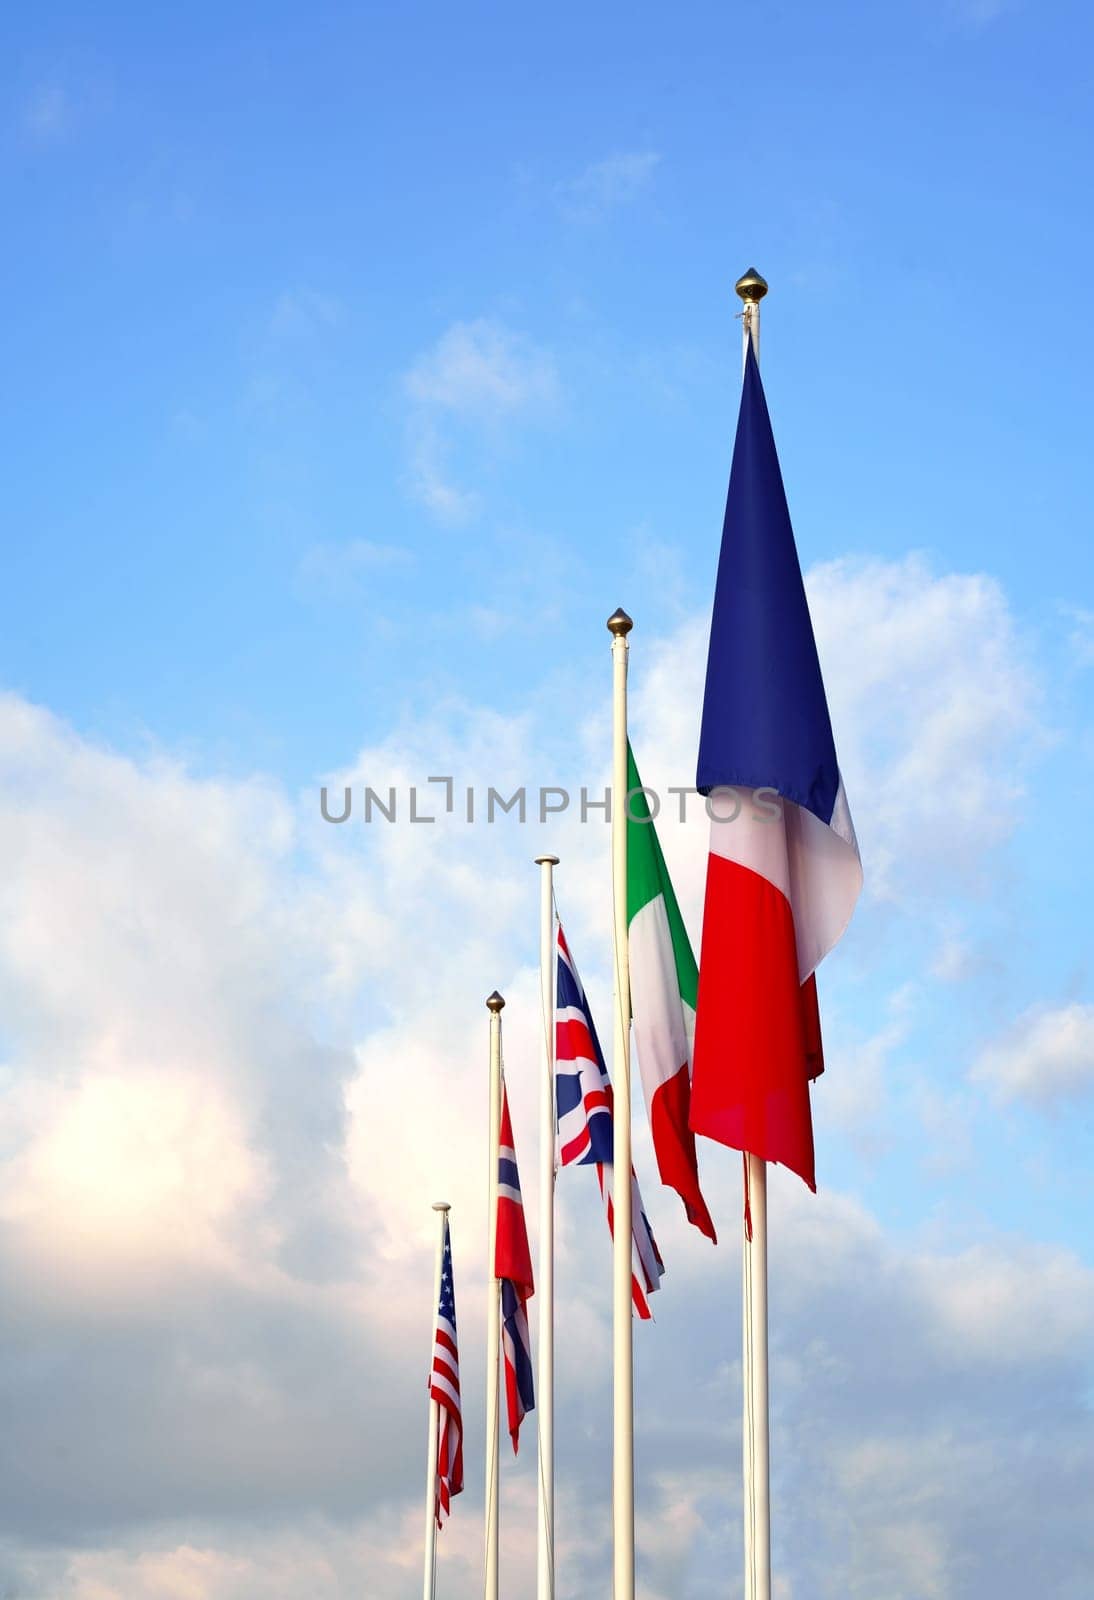 Flags of America, Italy, France of the European Union. National waving flag of united states on pole against blue cloudless sky in daylight by aprilphoto